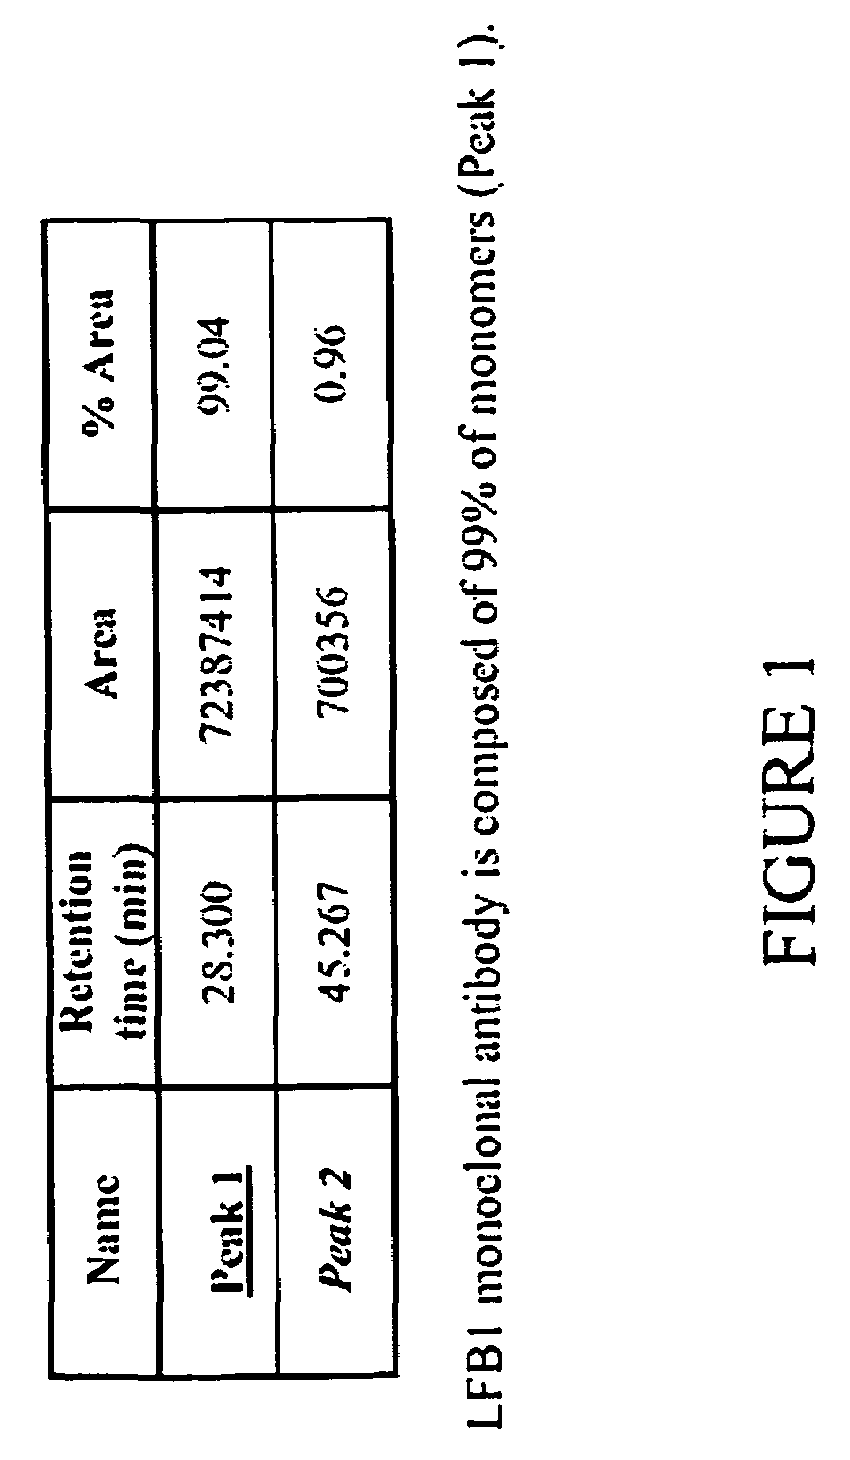 Preparation of human, humanized or chimaeric antibodies or polypeptides having different binding profiles to Fcgamma receptors